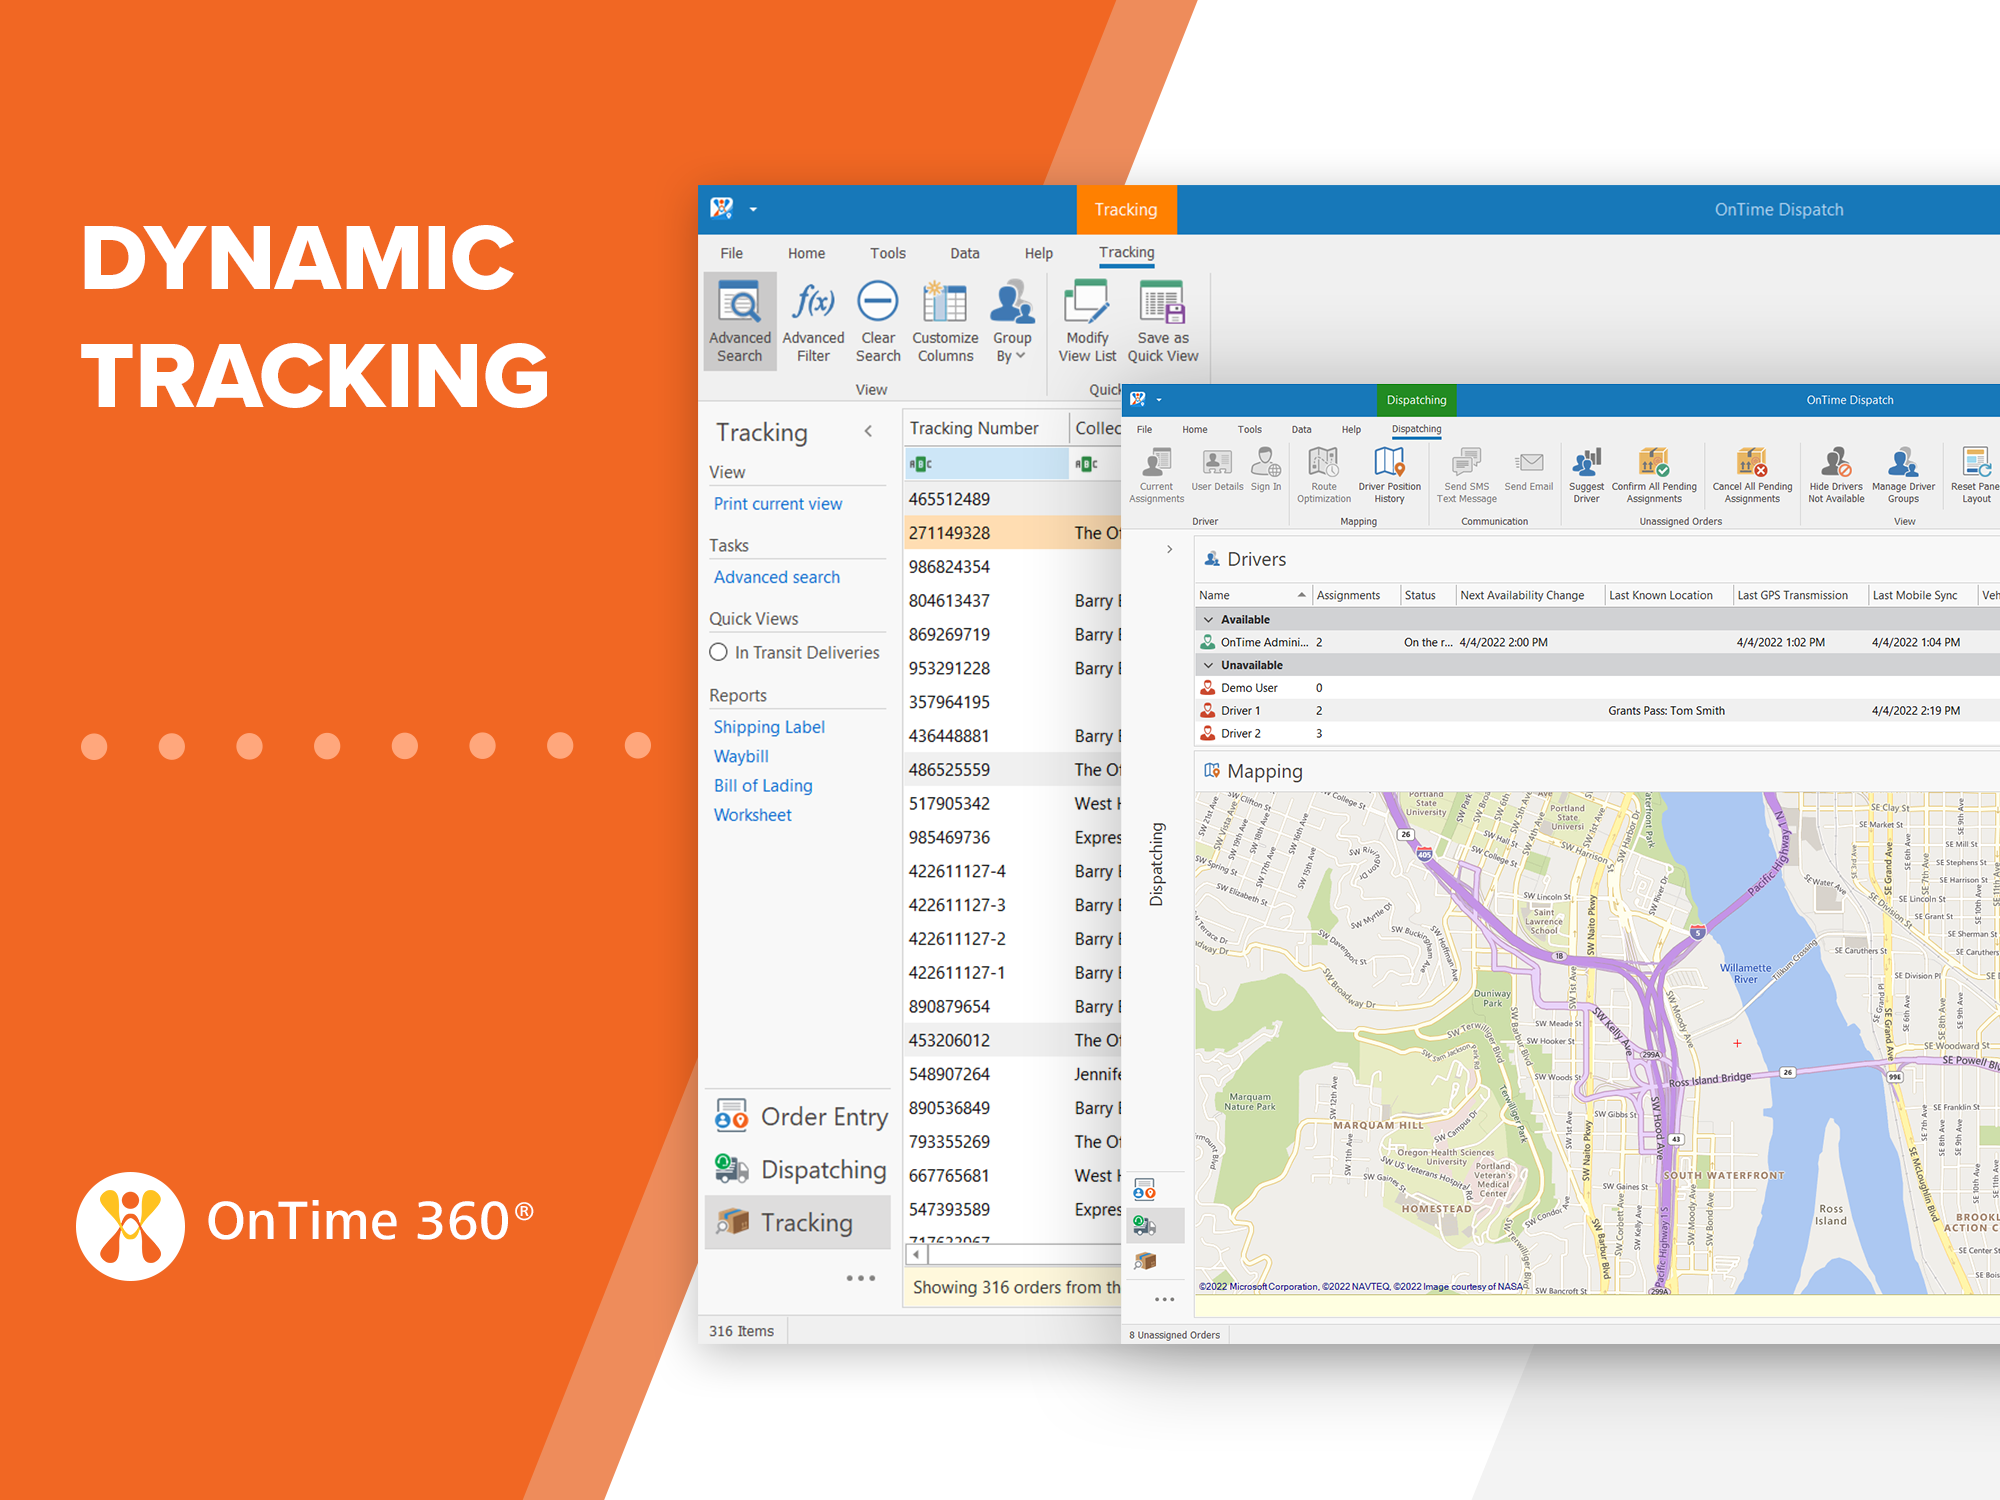 OnTime 360 Software - Complete Dispatching Tools